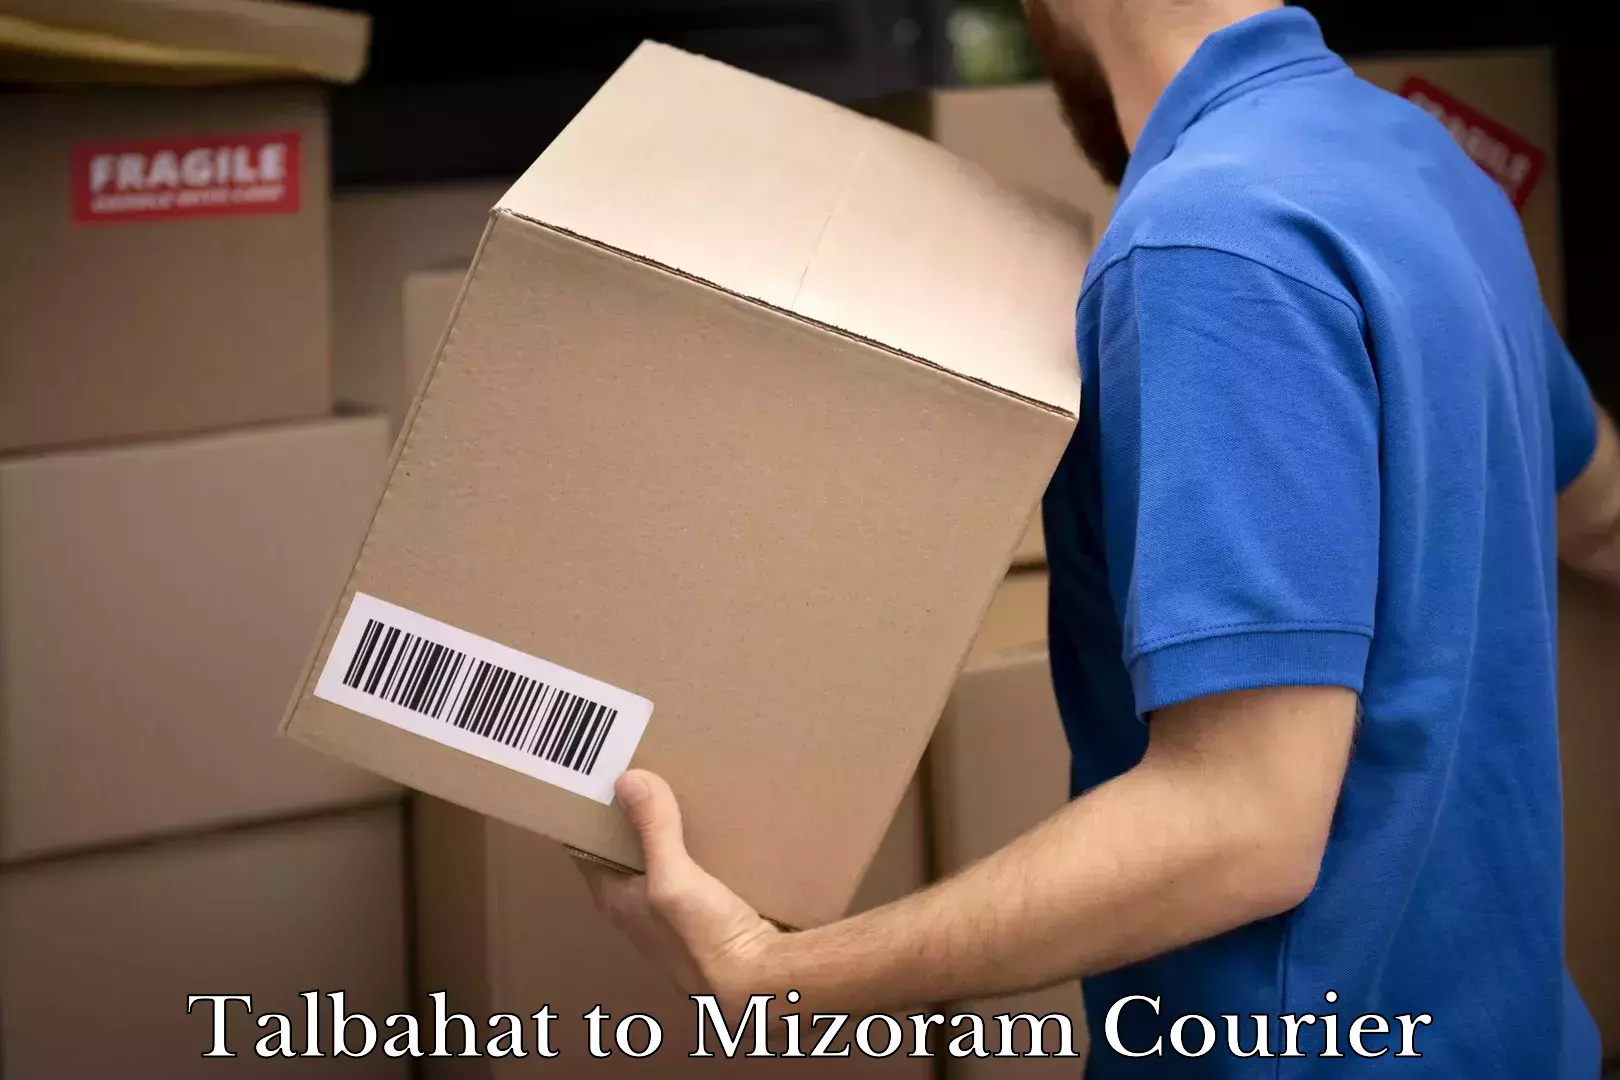 24-hour courier service Talbahat to Mizoram